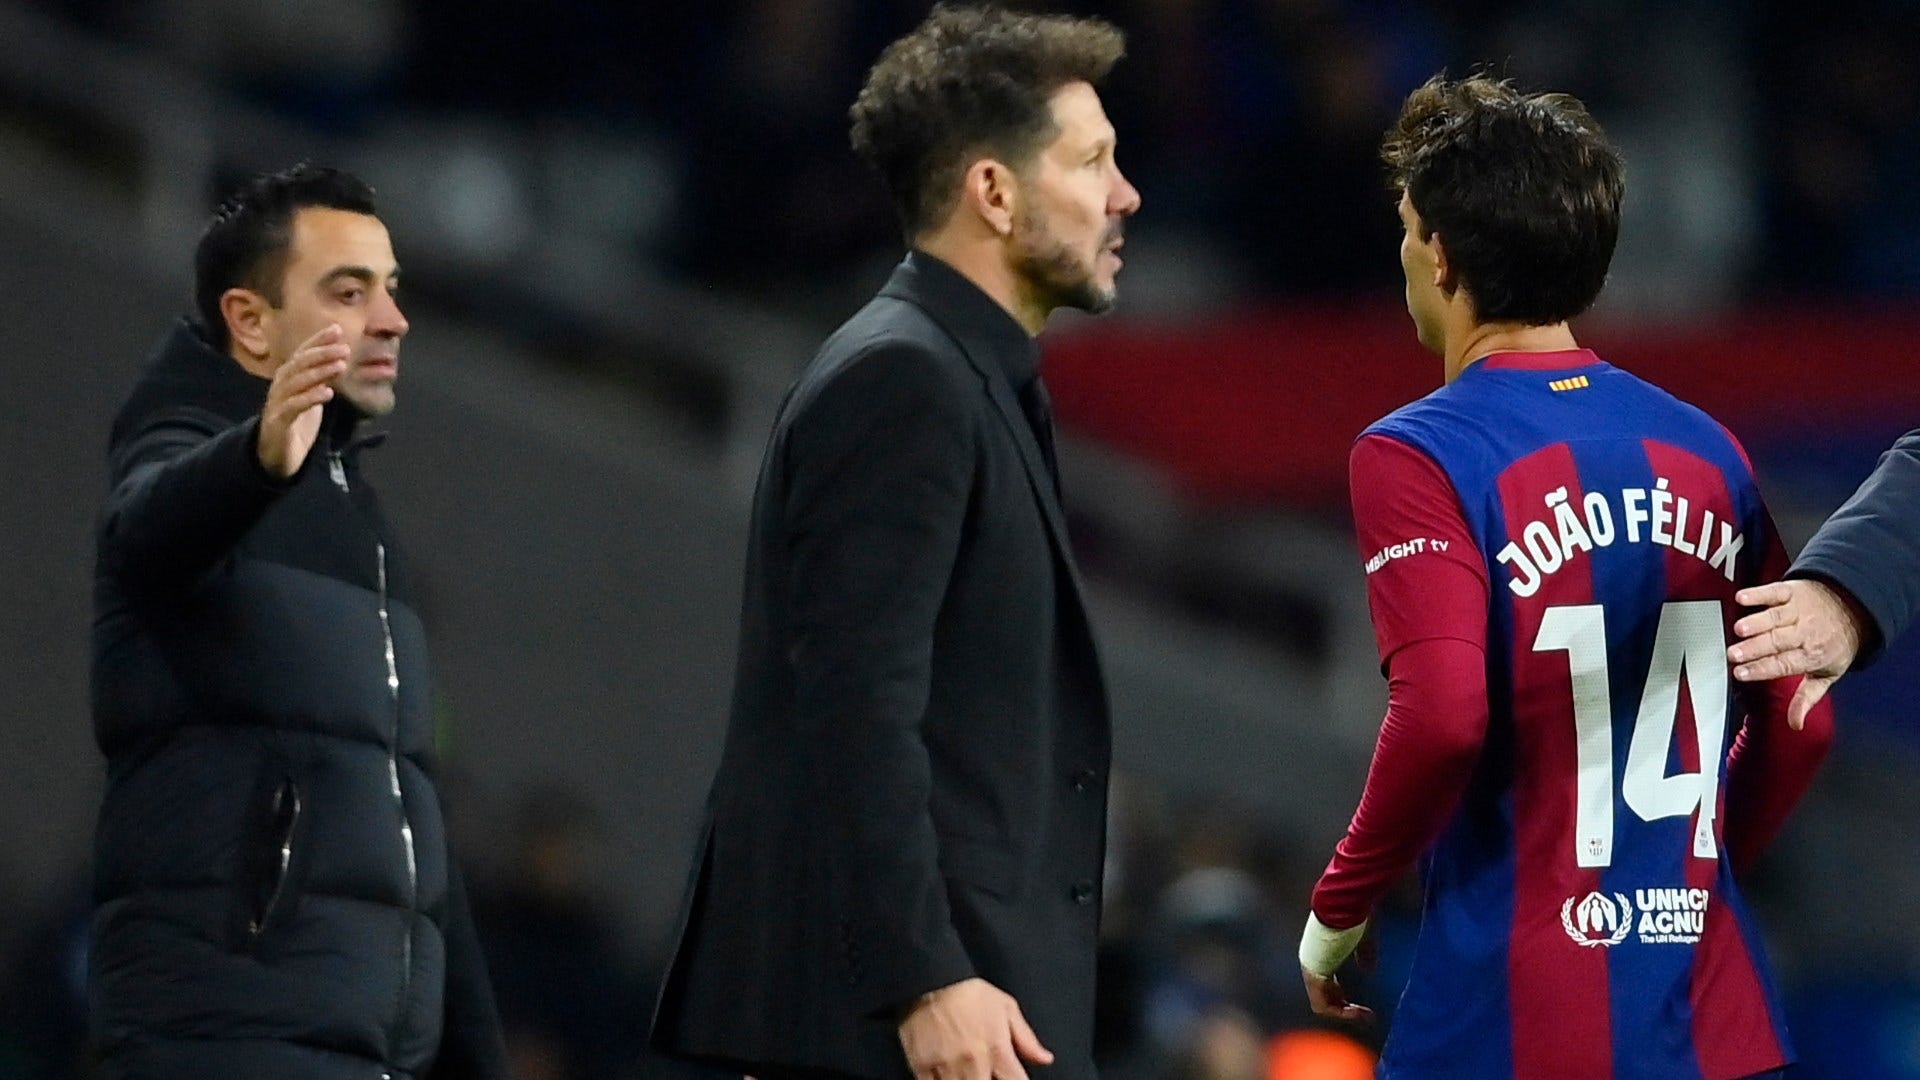 No love lost between Joao Felix and Diego Simeone! Atletico Madrid boss completely blanks Barcelona forward after feisty clash against parent club